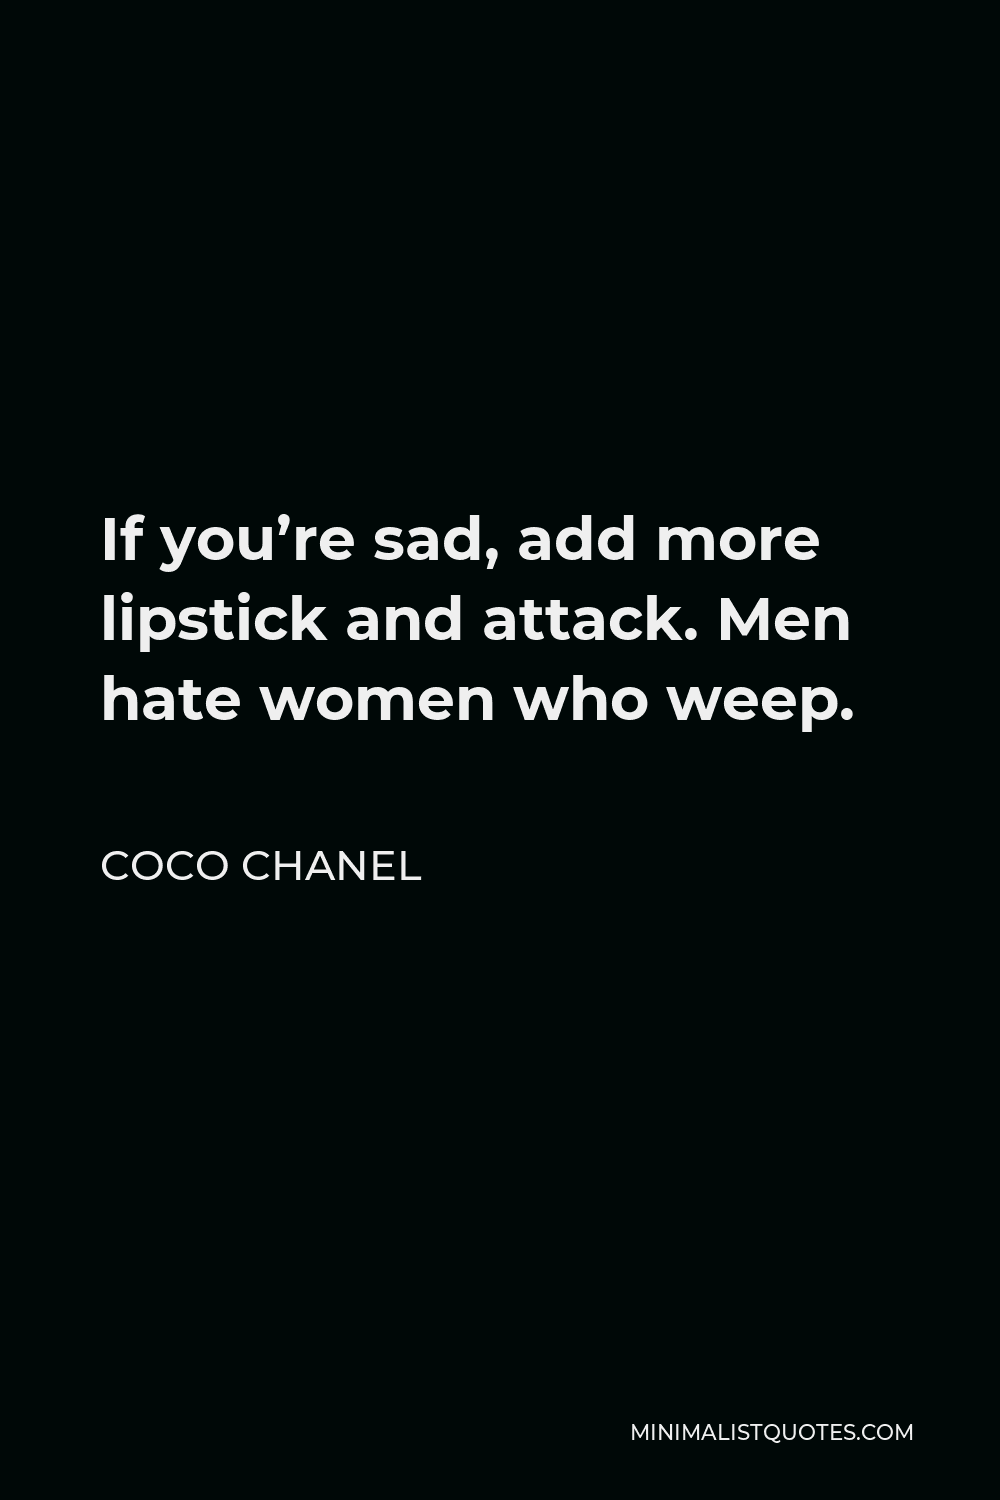 Coco Chanel Quote - If you’re sad, add more lipstick and attack. Men hate women who weep.